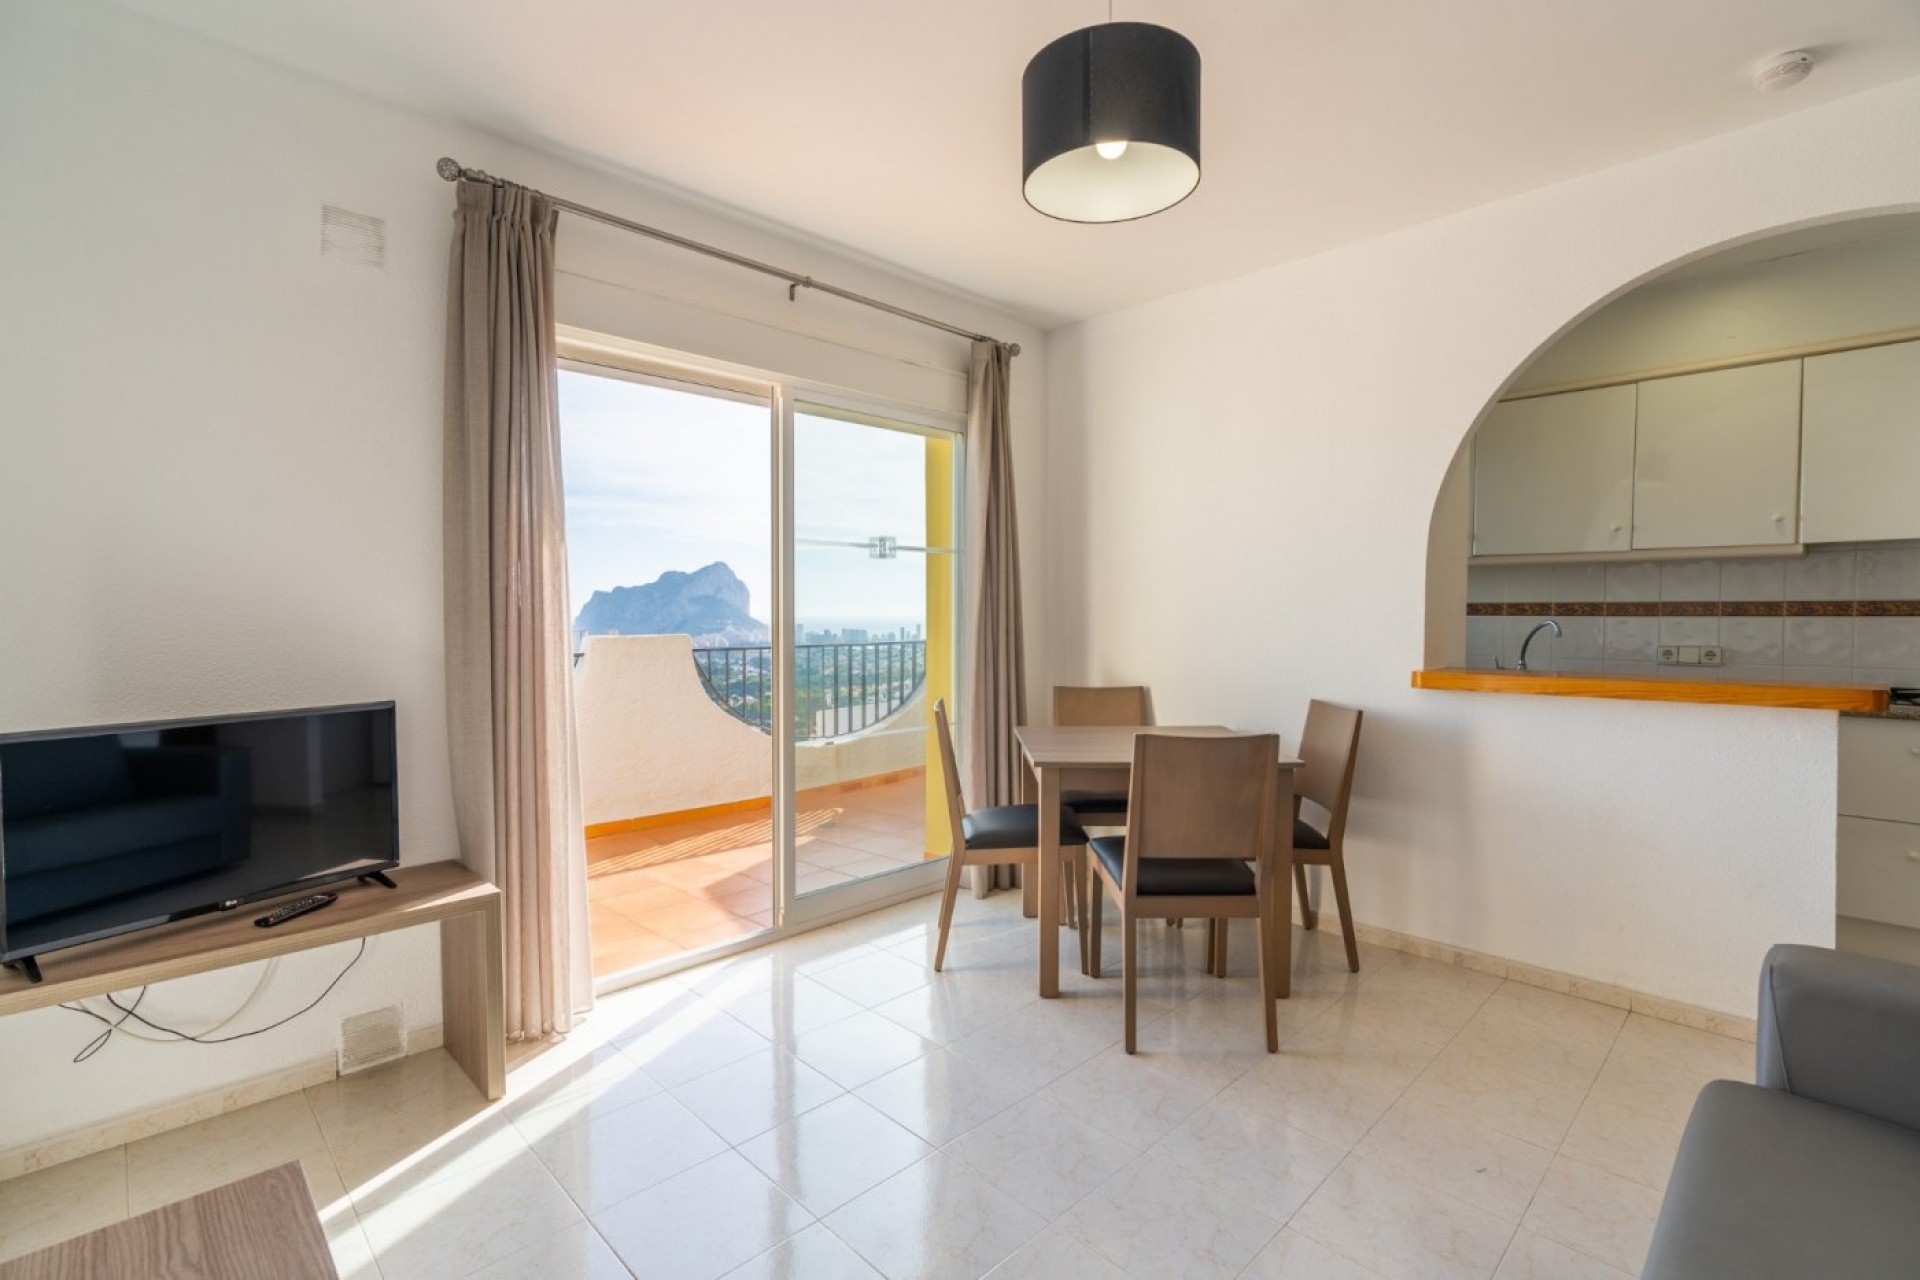 New Property for sale - Bungalow for sale - Calpe - Gran Sol